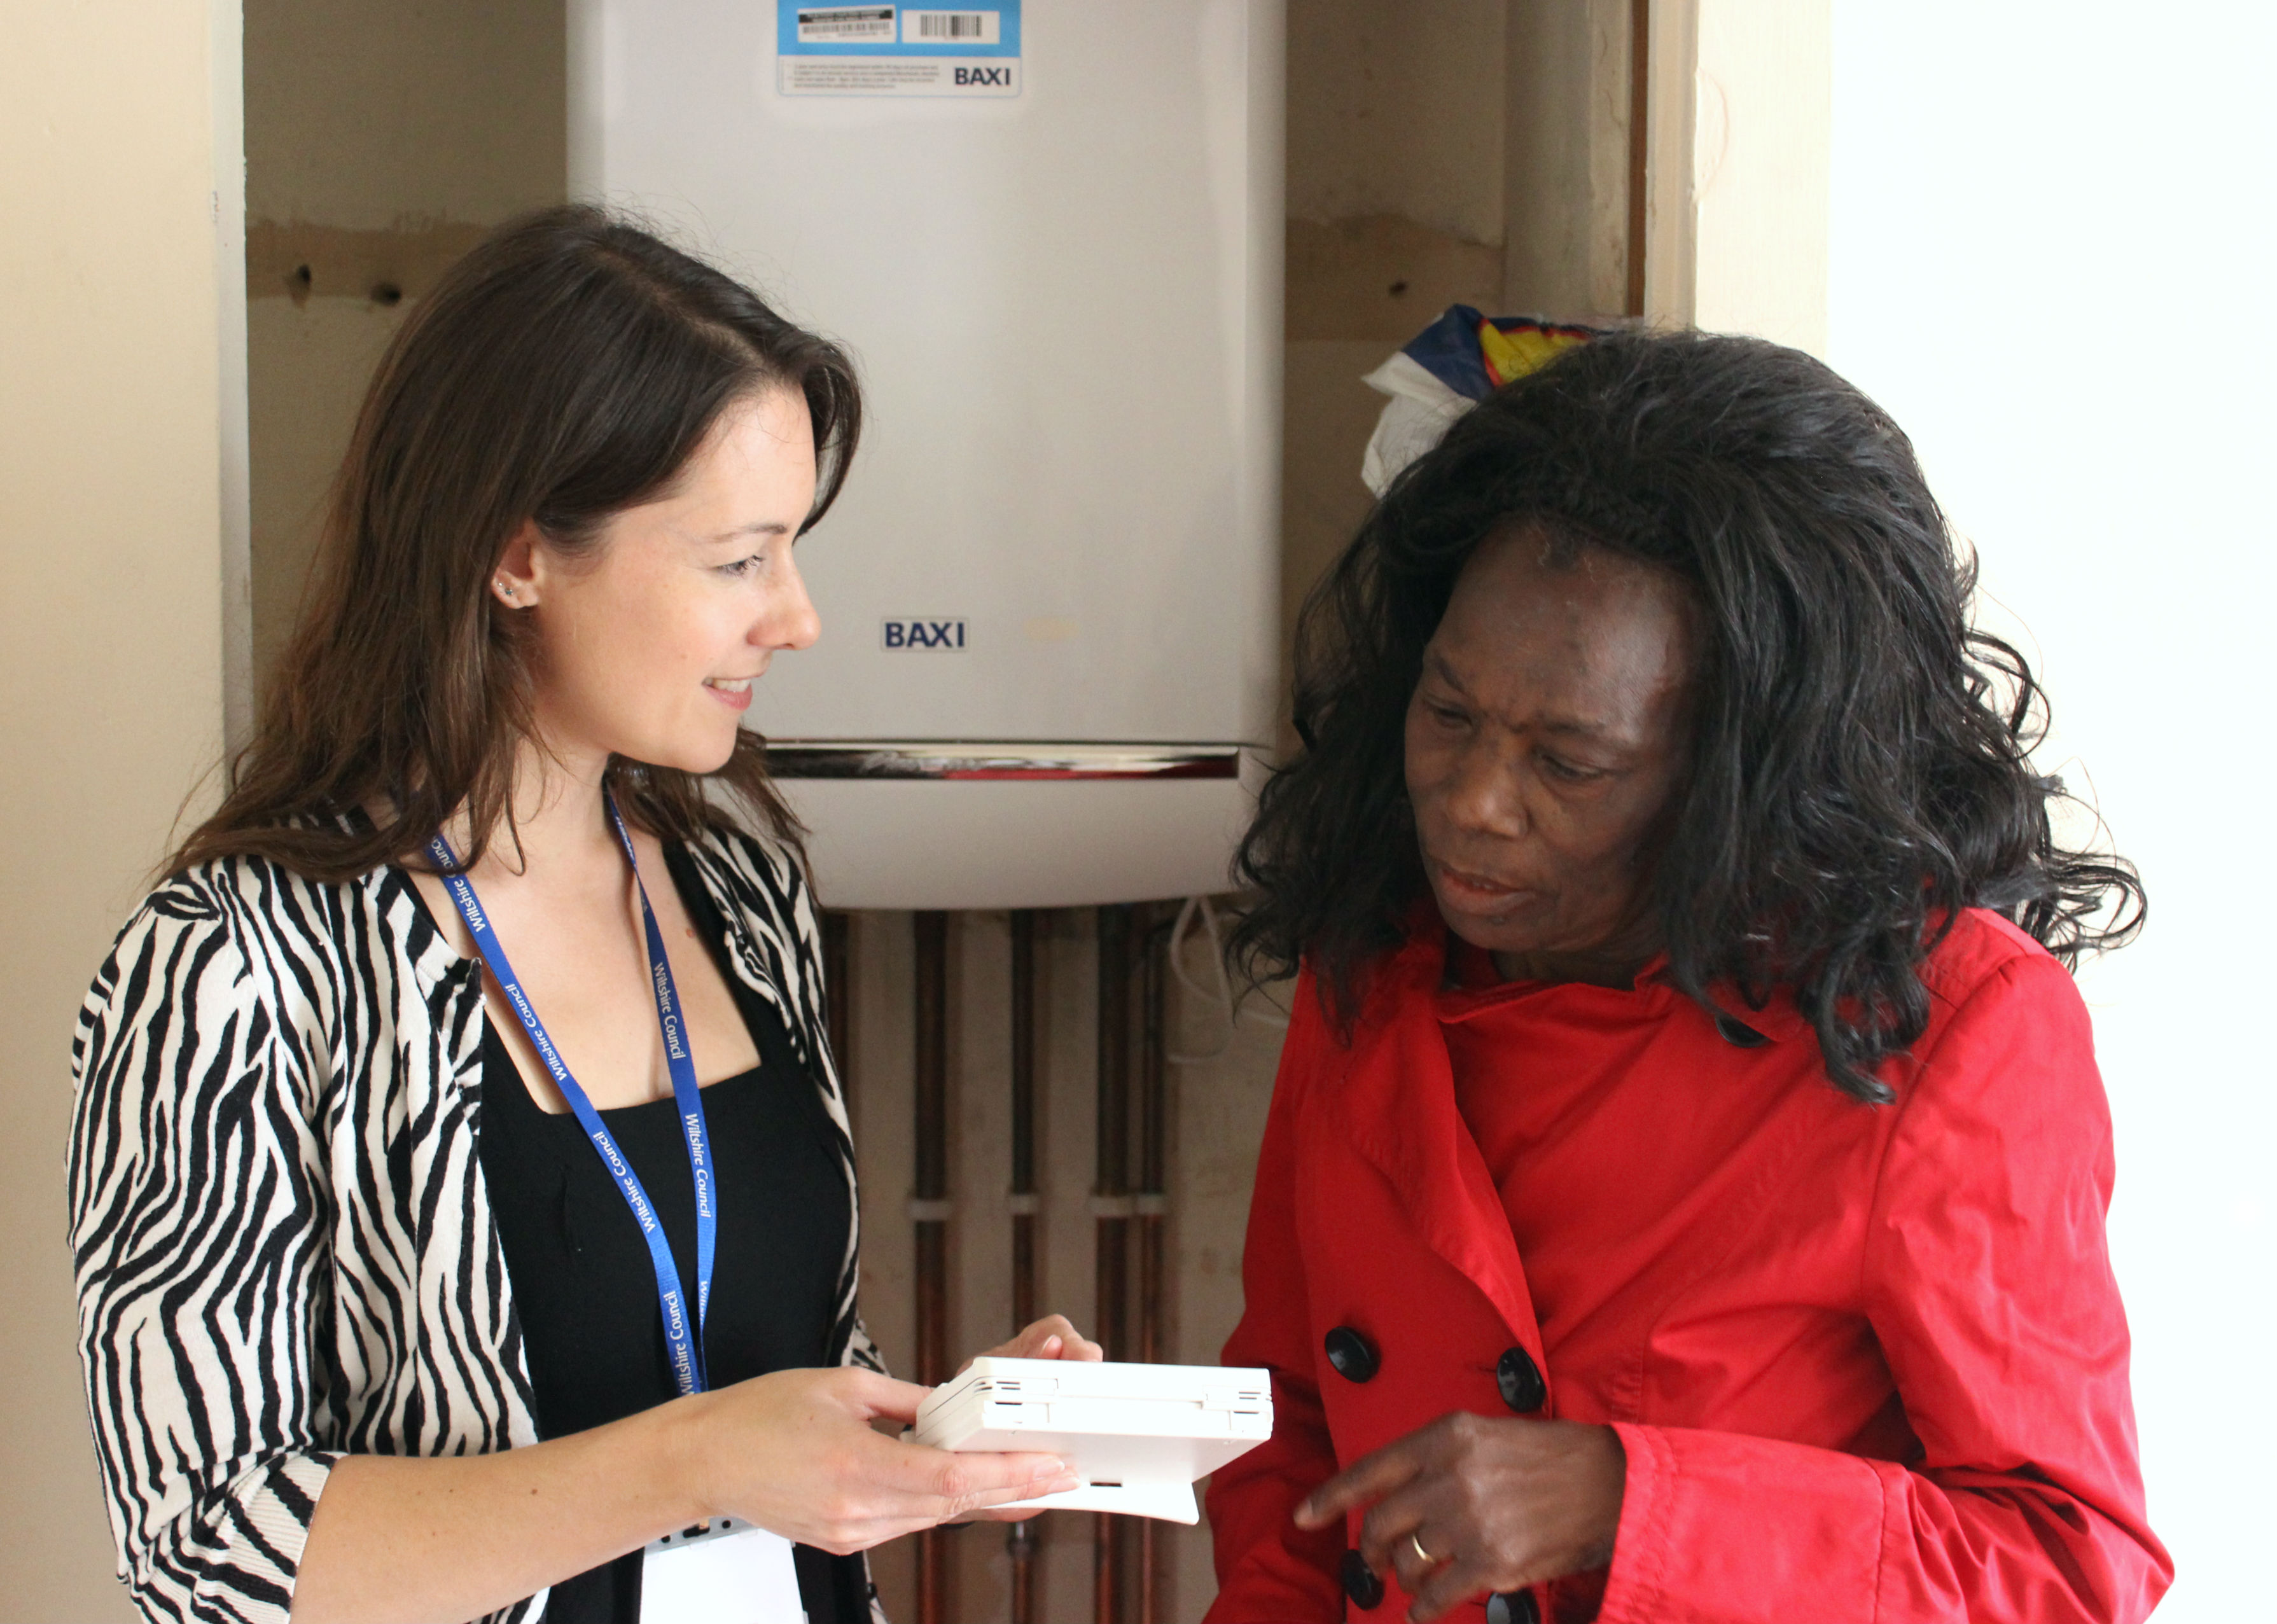 Two women looking at a device and stood in front of a boiler